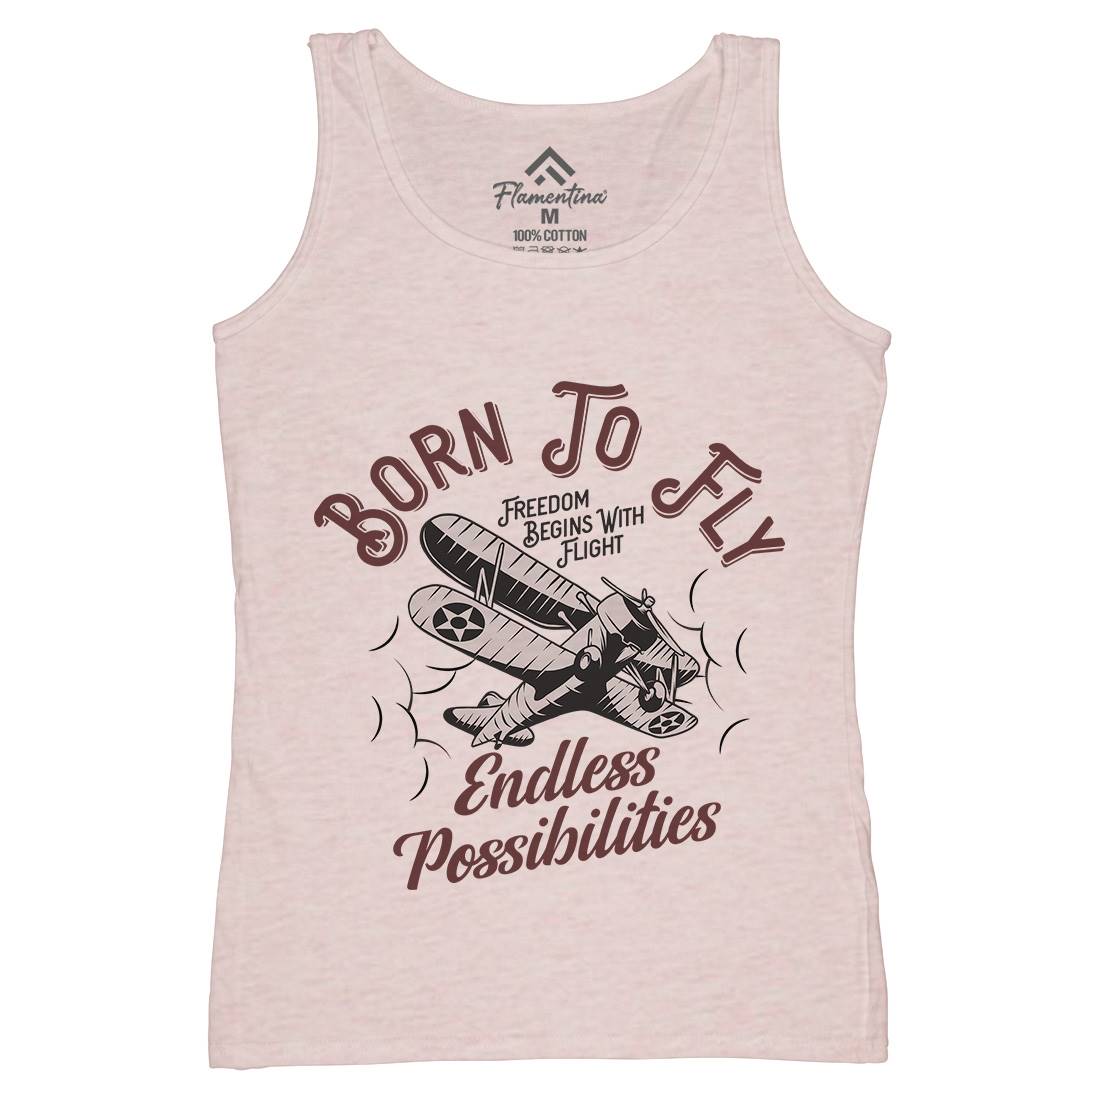 Born To Fly Womens Organic Tank Top Vest Vehicles D913